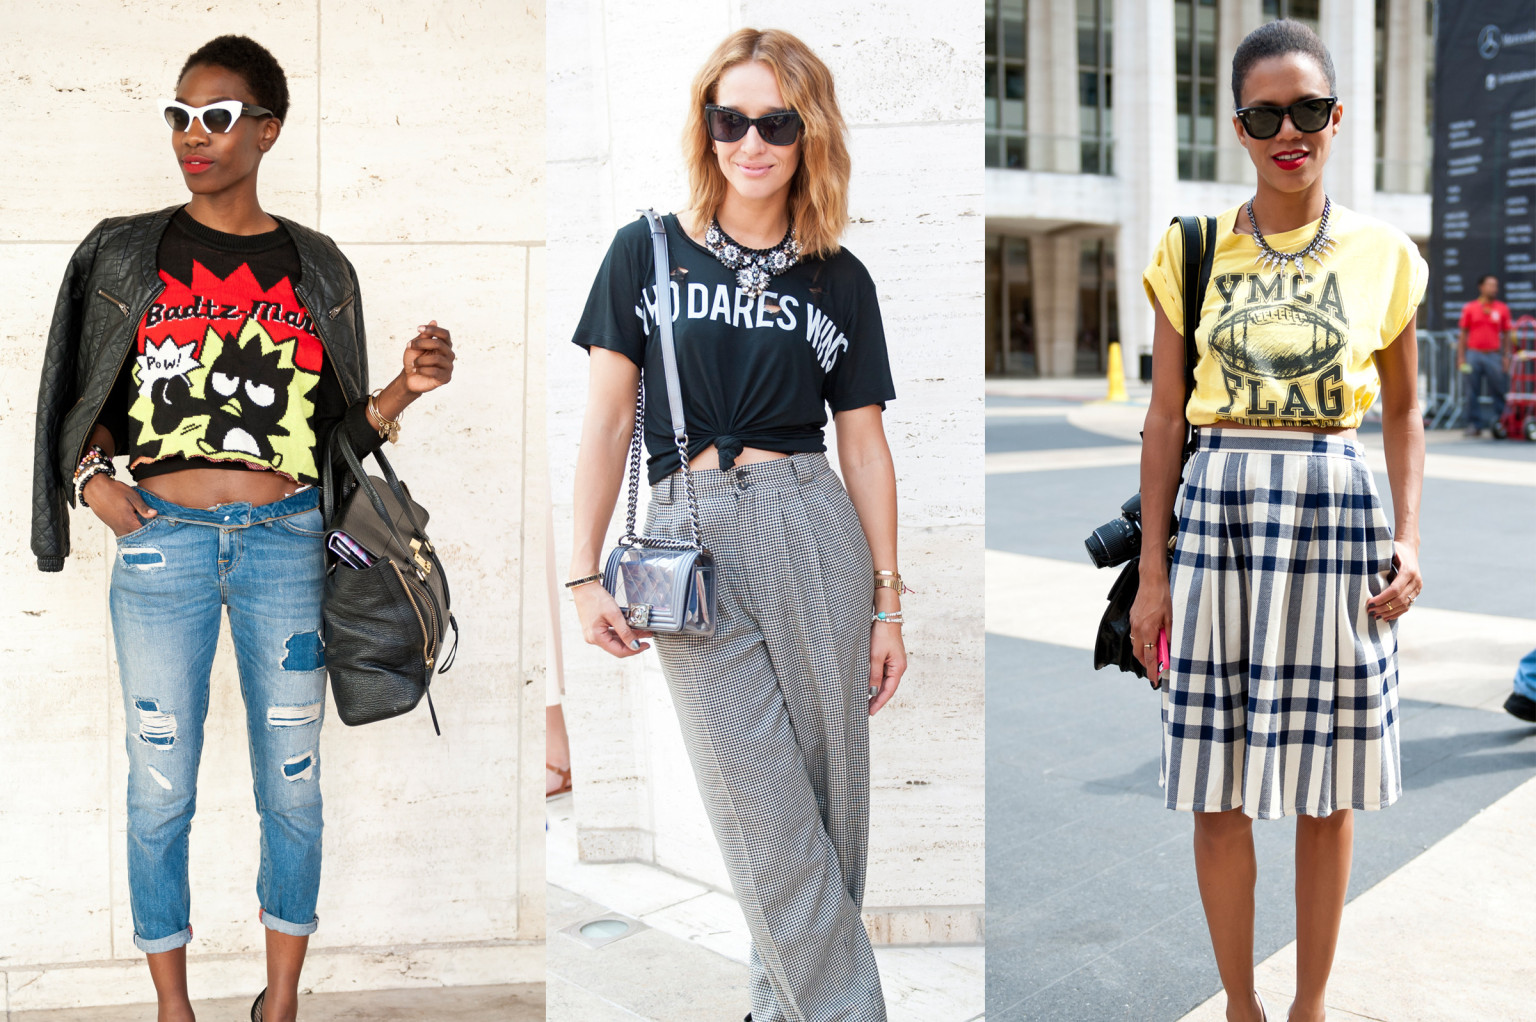 Yes, You Can Look Good In A Ratty, Old T-Shirt | HuffPost